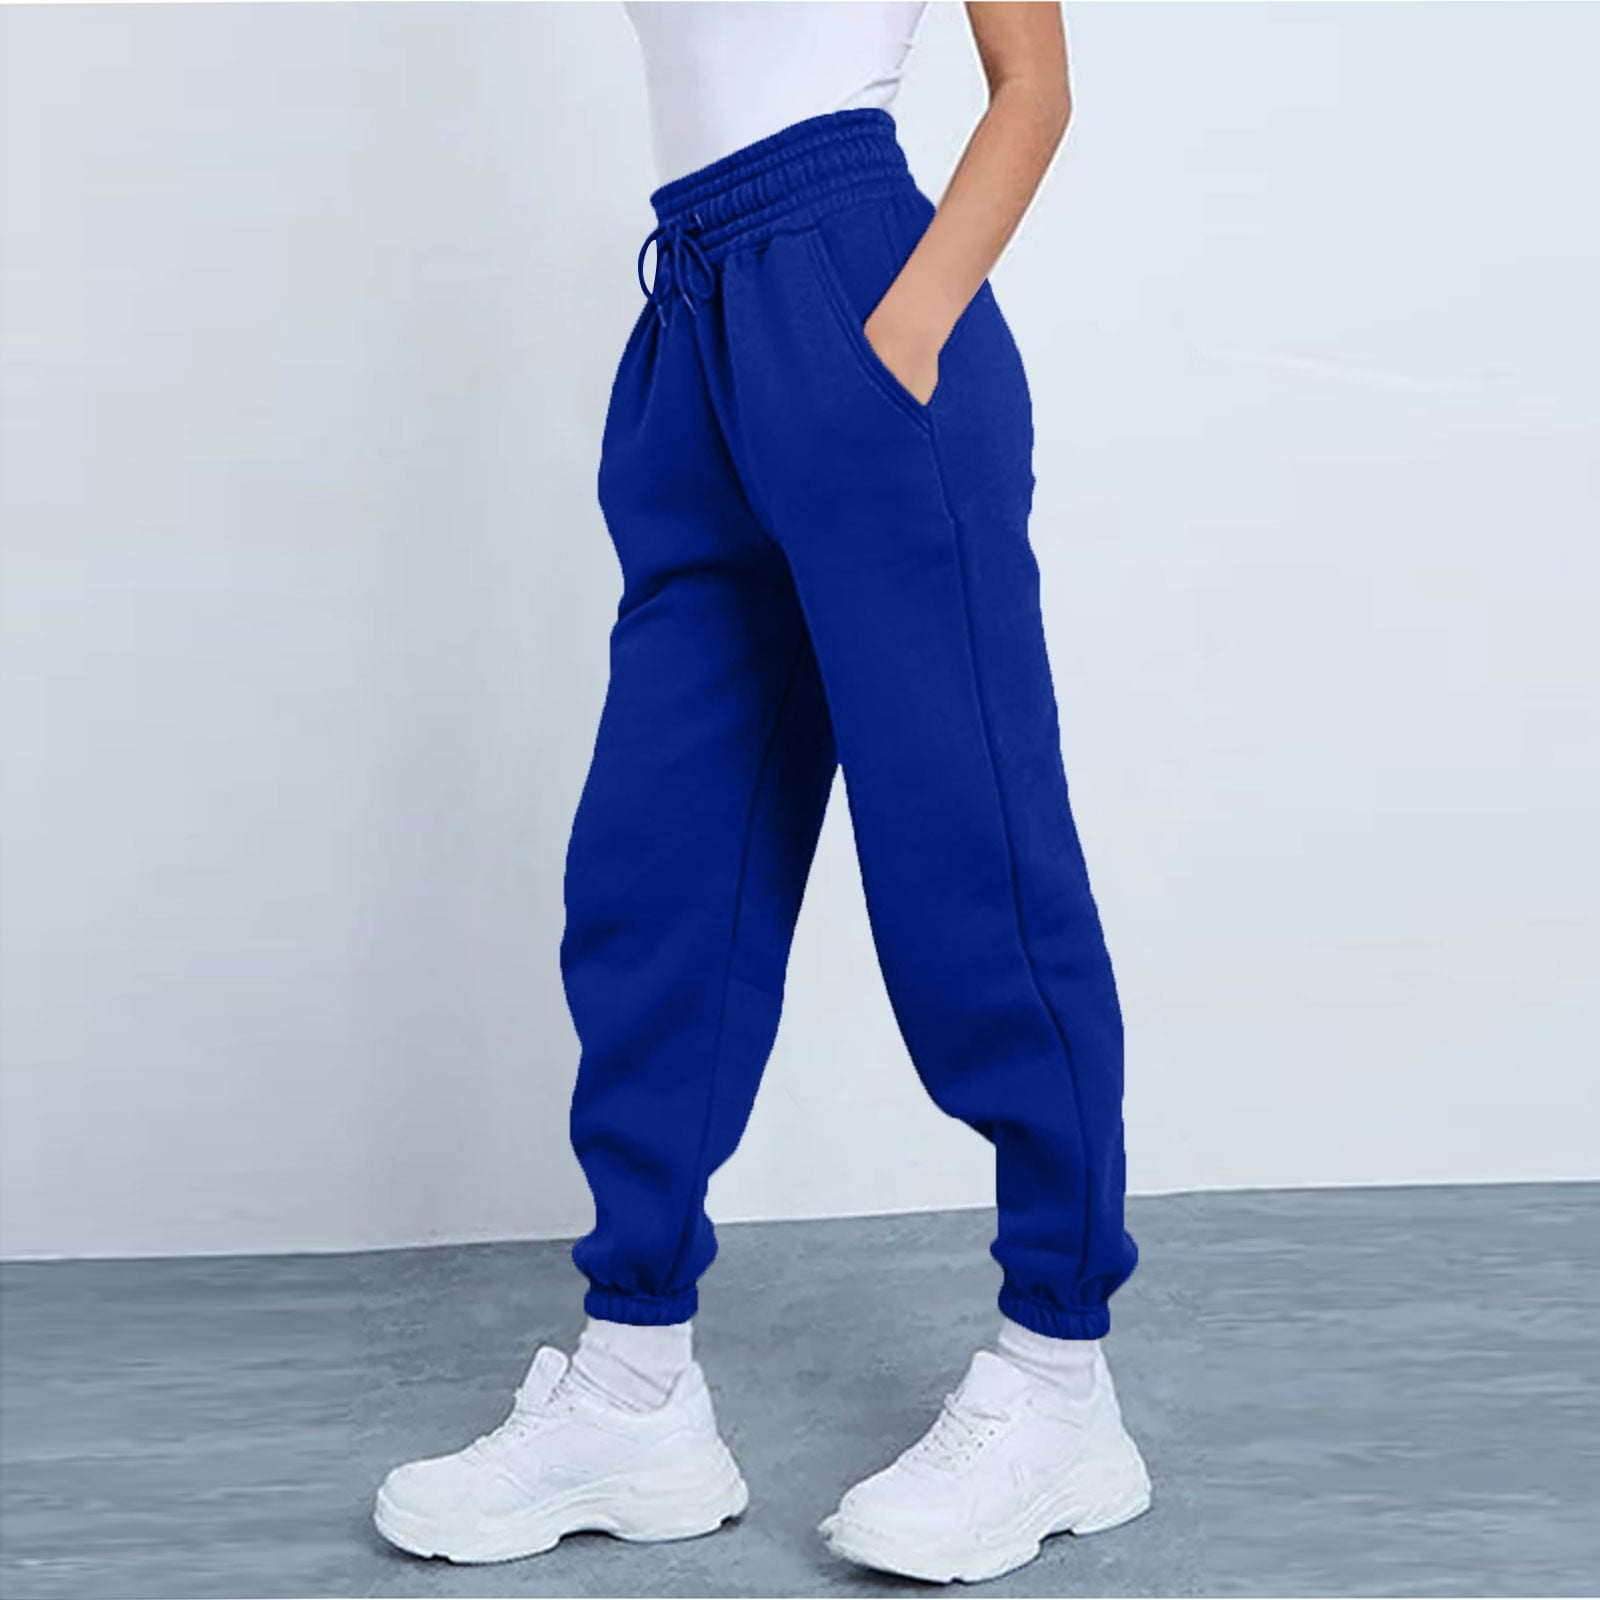 Susanny Straight Leg Sweatpants for Women Fleece Lined Drawstring Straight  Leg with Pockets Joggers Pants Baggy Athletic Petite High Waisted Gym